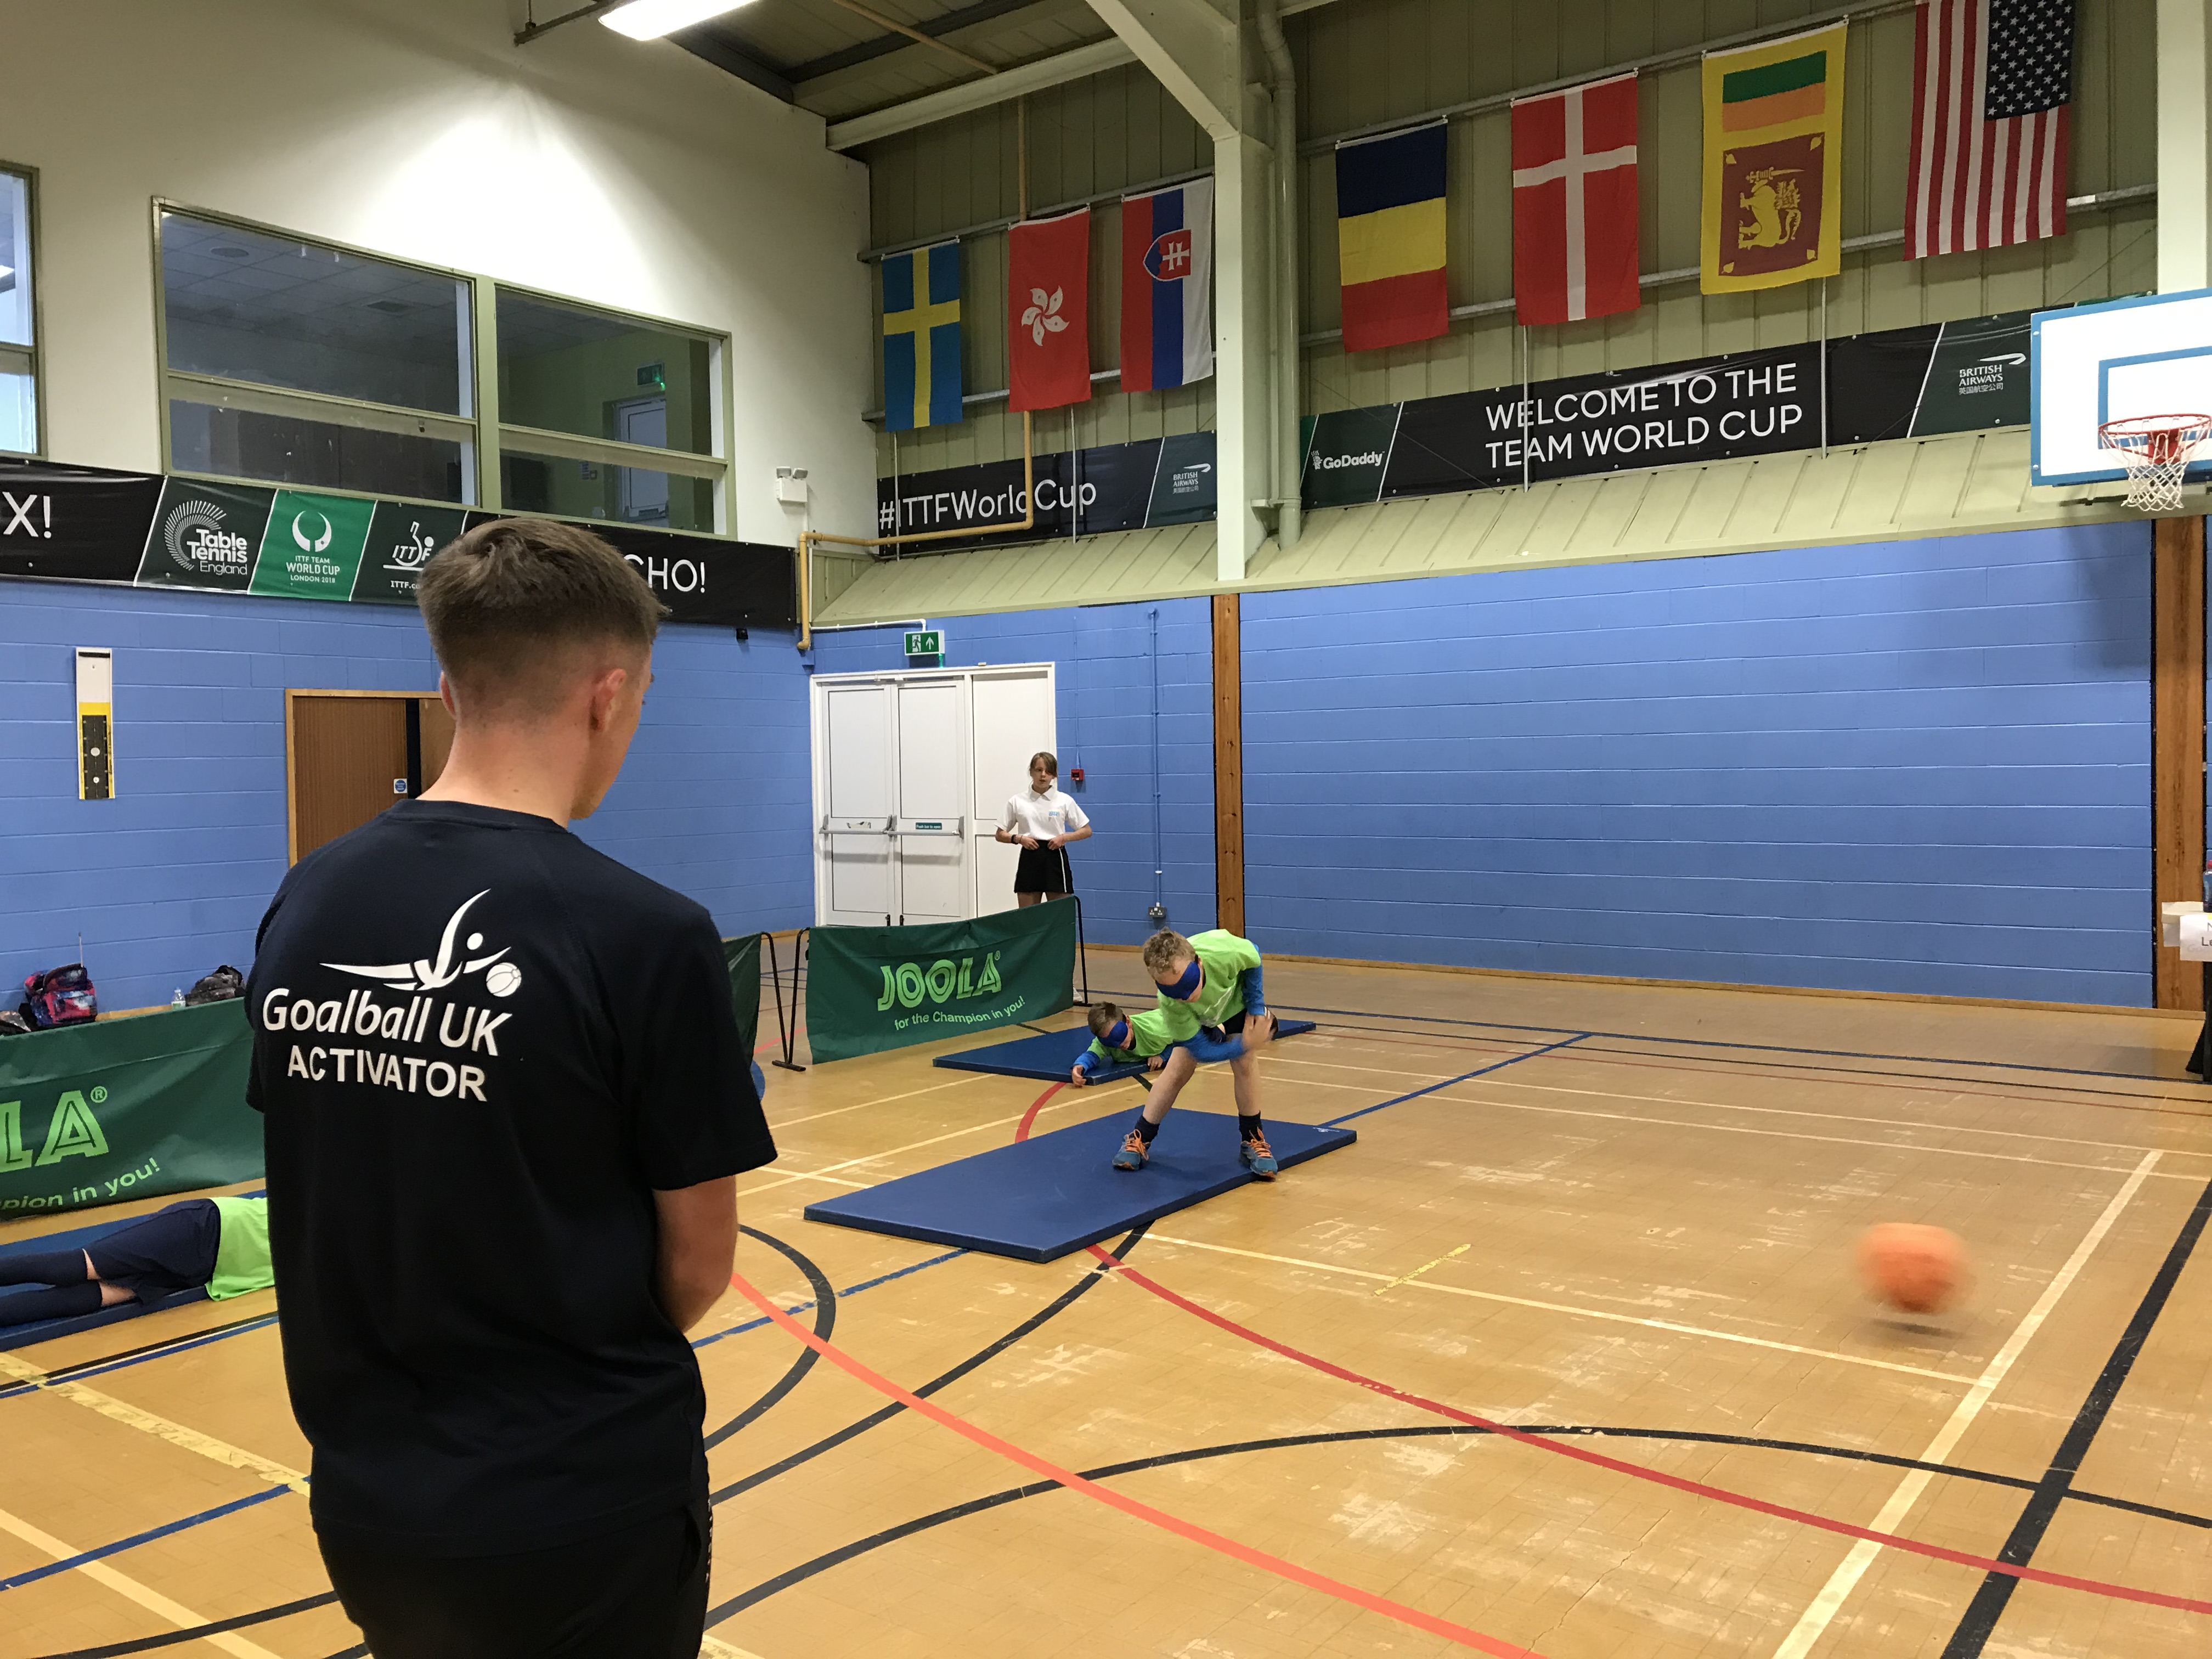 Action shot taken at Lincolnshire School Games, with Goalball UK Activator in foreground